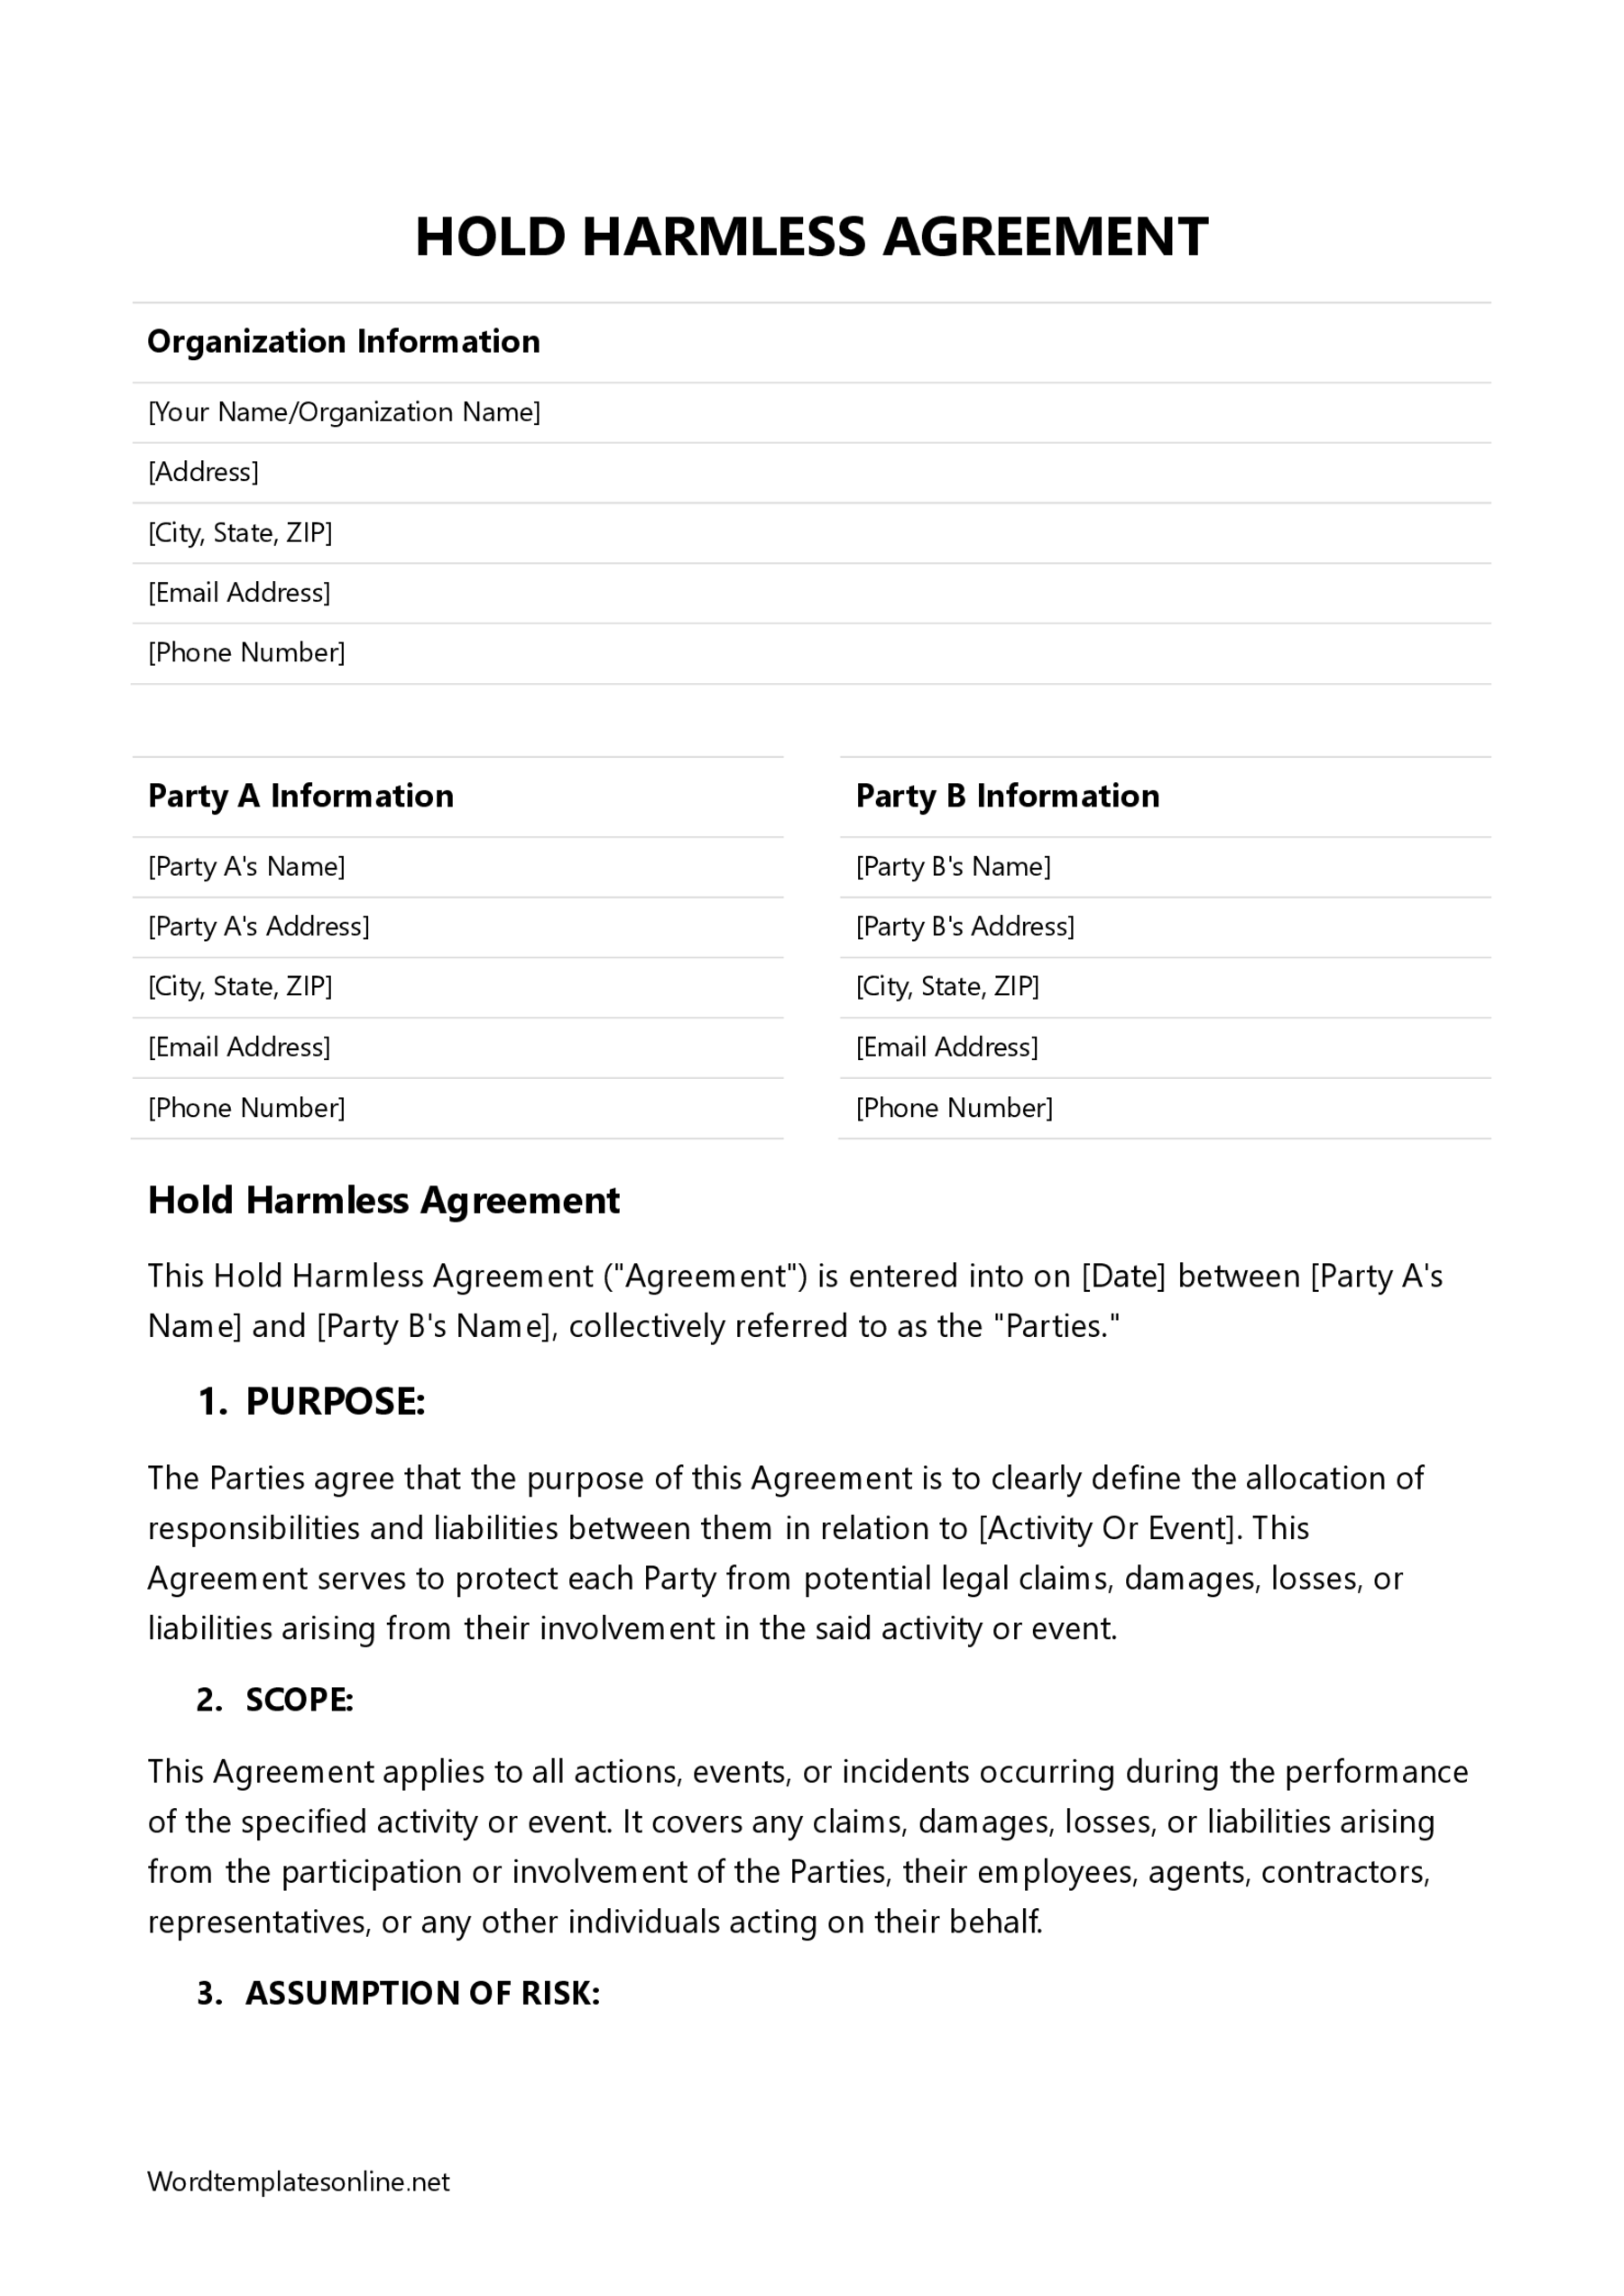 Editable Hold Harmless Agreement Template in Word